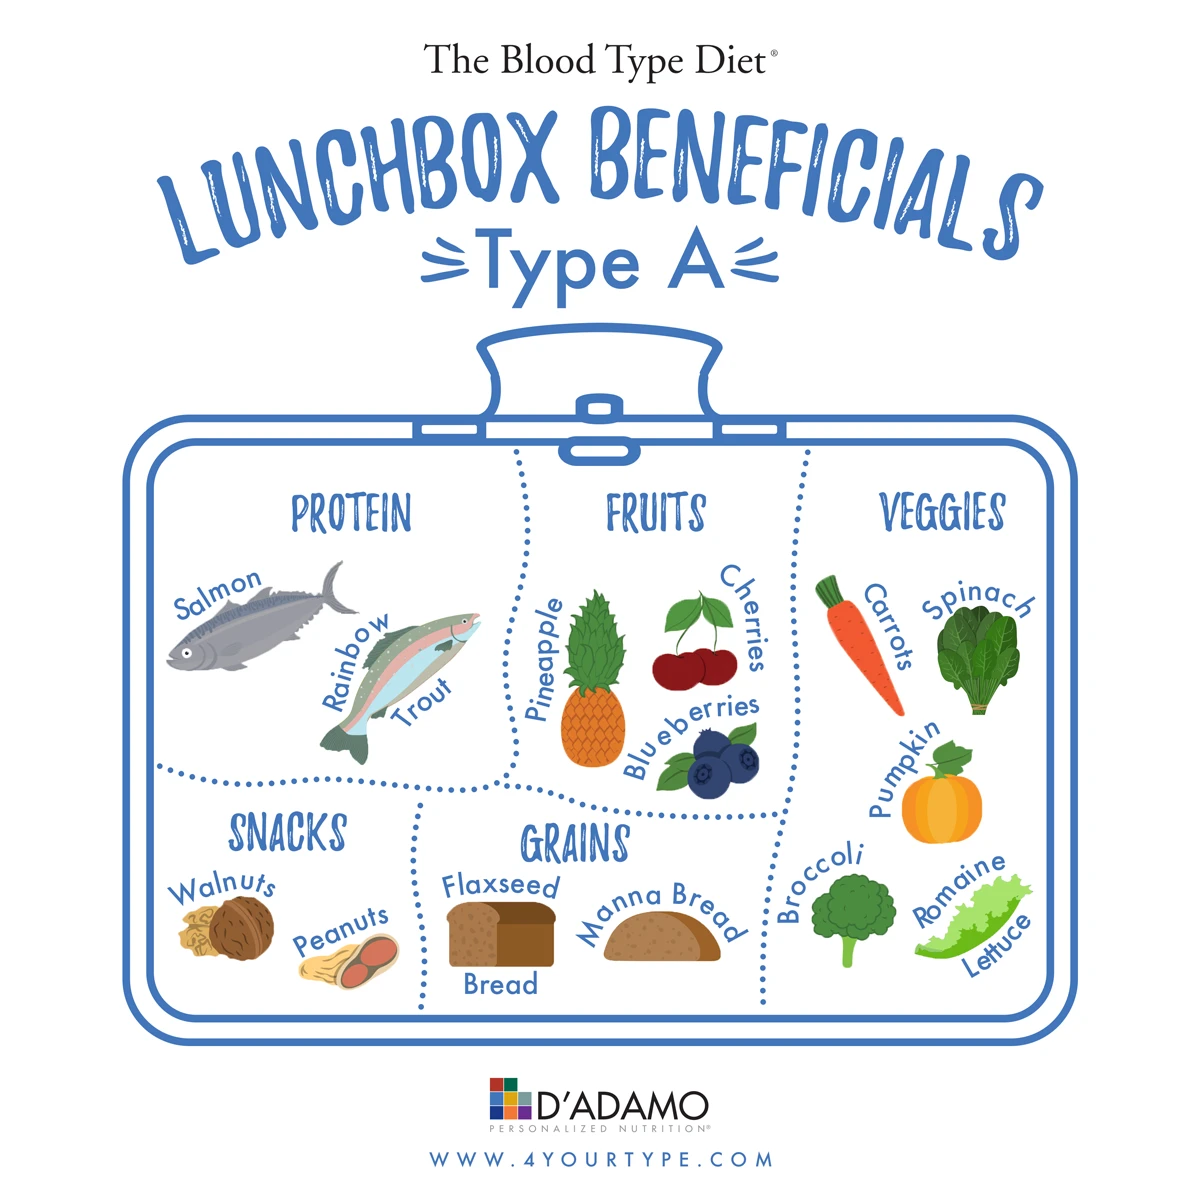 Lunchbox Beneficials Blood Type A